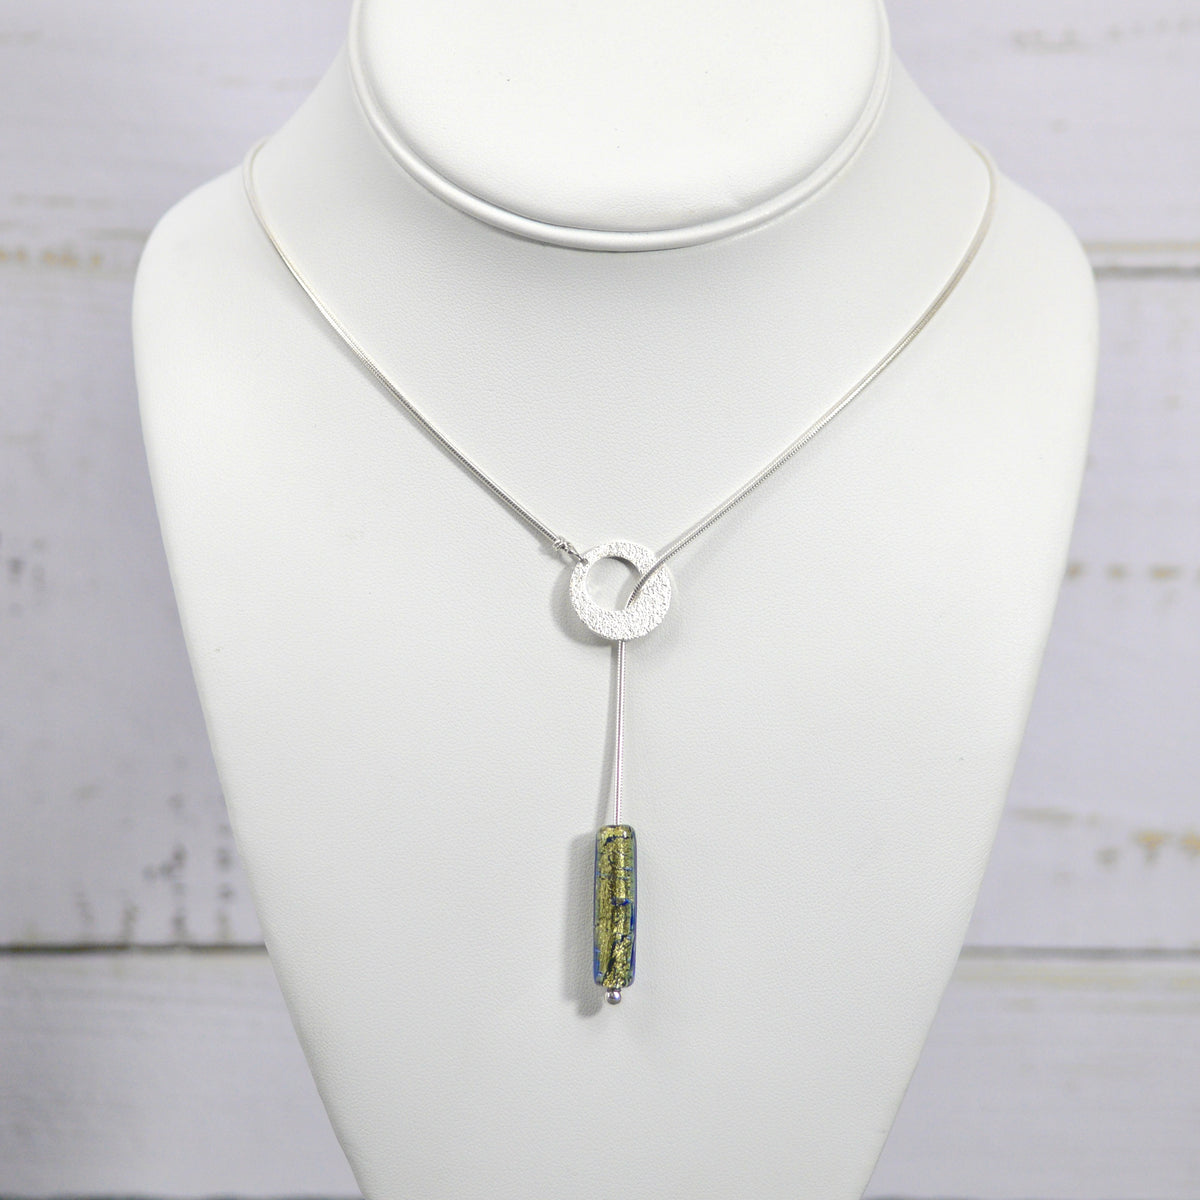 Siena Silver and Murano Glass Necklace, Earrings, Blue-Green-Gold - My Italian Decor